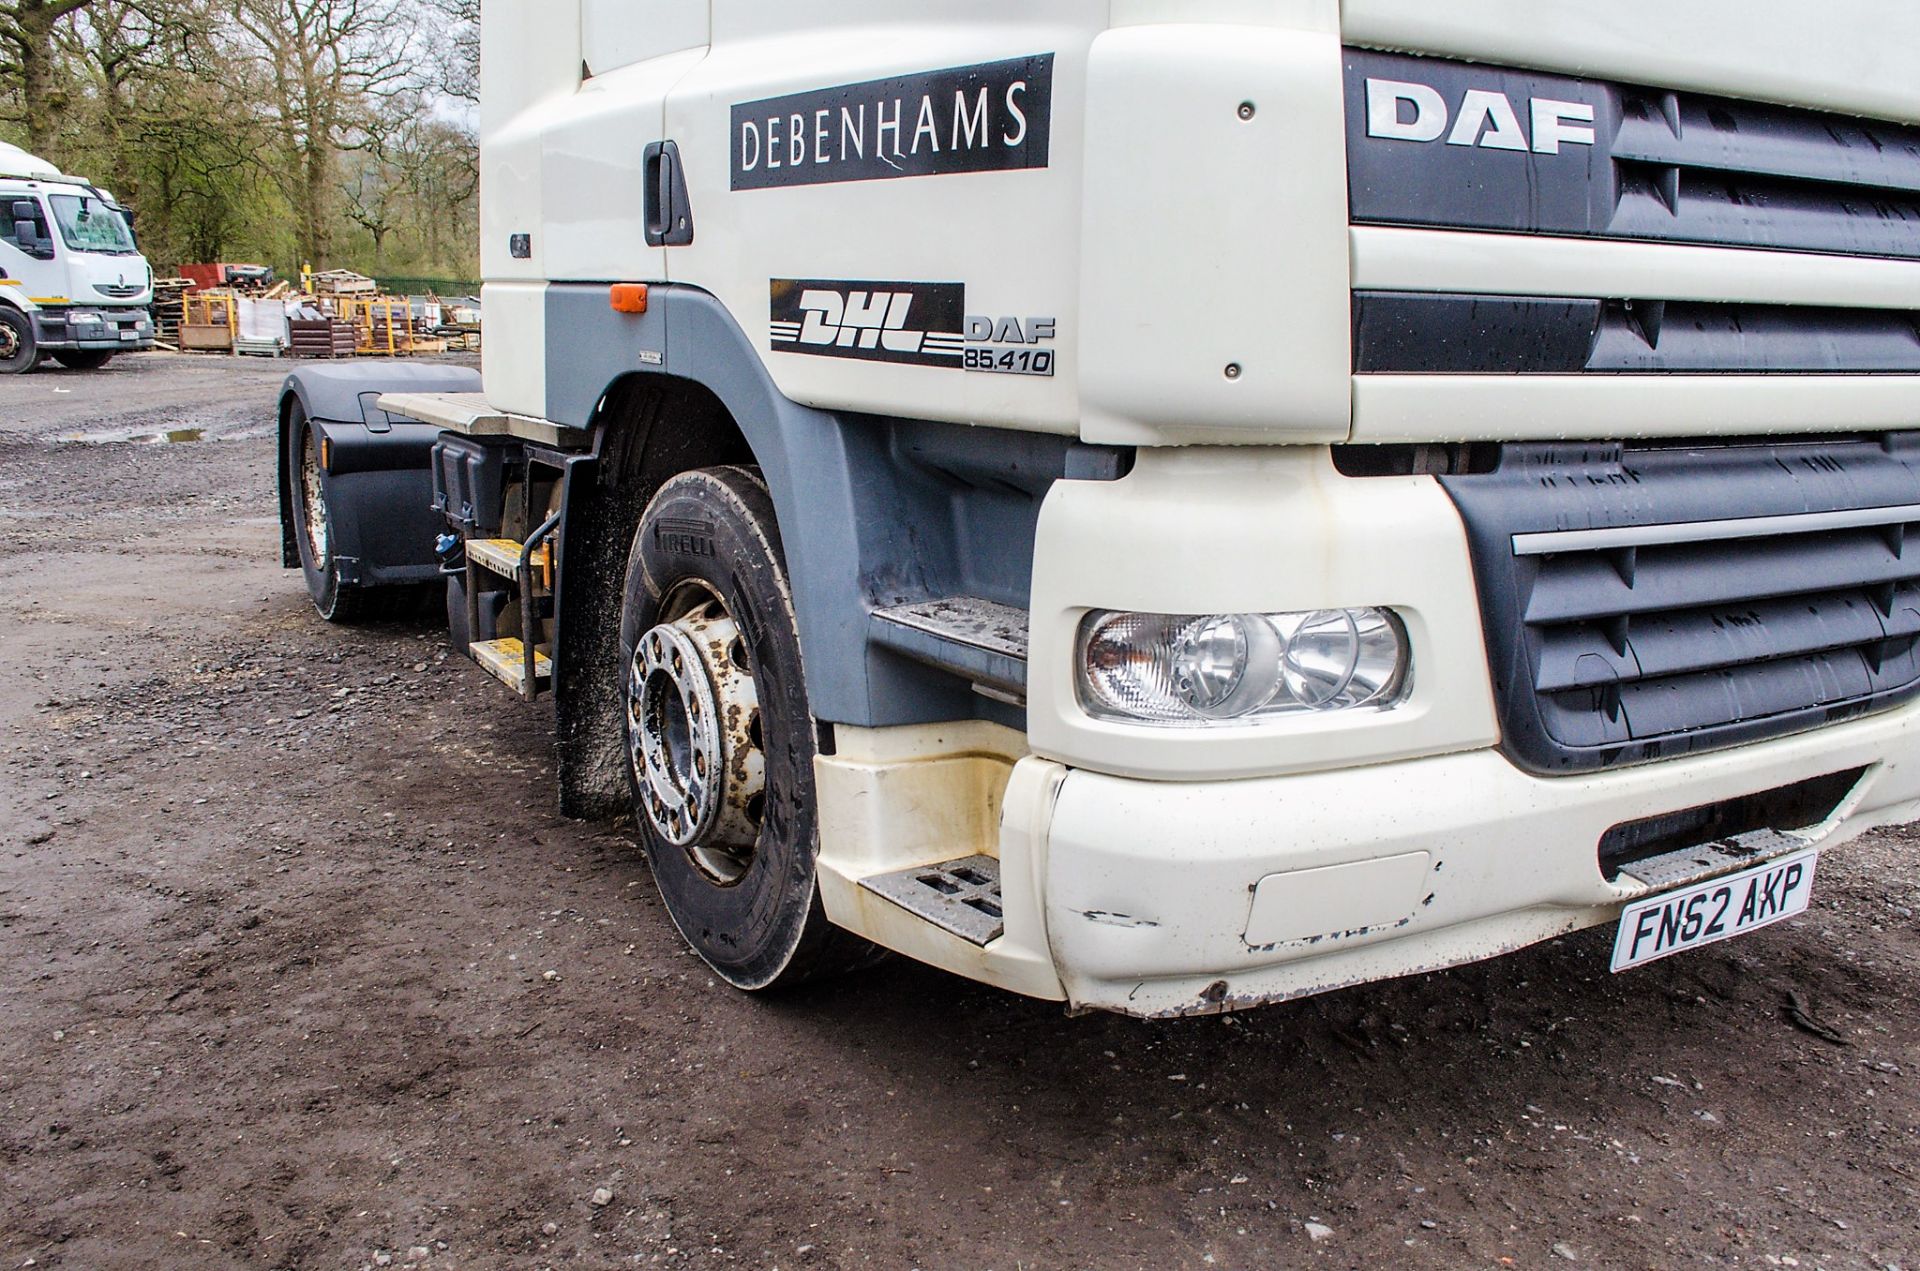 DAF CF 85.410 Euro 5 4 x 2 tractor unit  Registration Number: FN62 AKP   Chassis Number: - Image 9 of 17